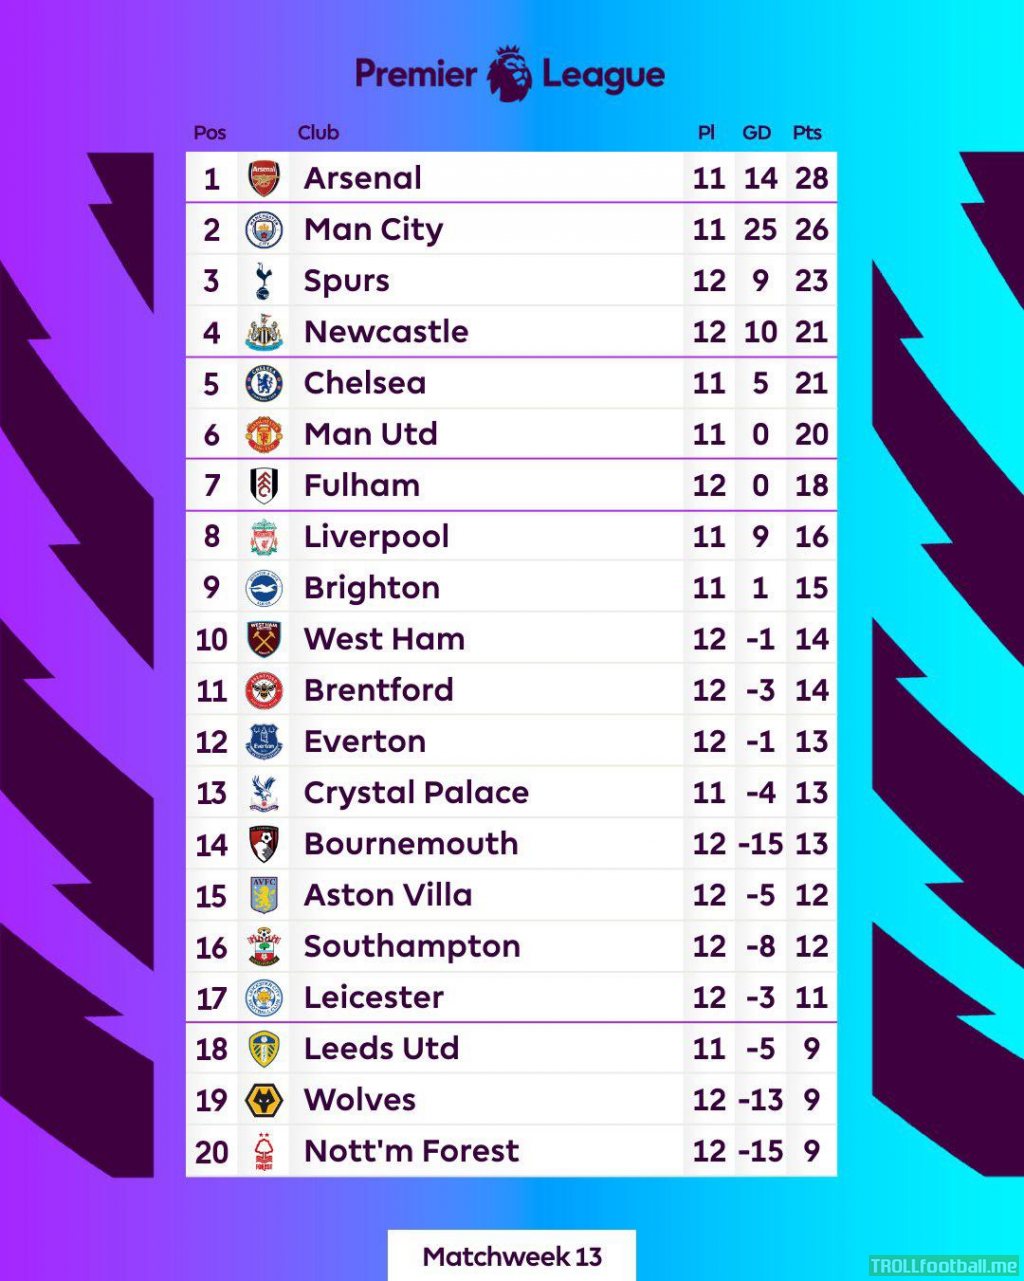 How the PL Table looks at the end of Matchweek 13